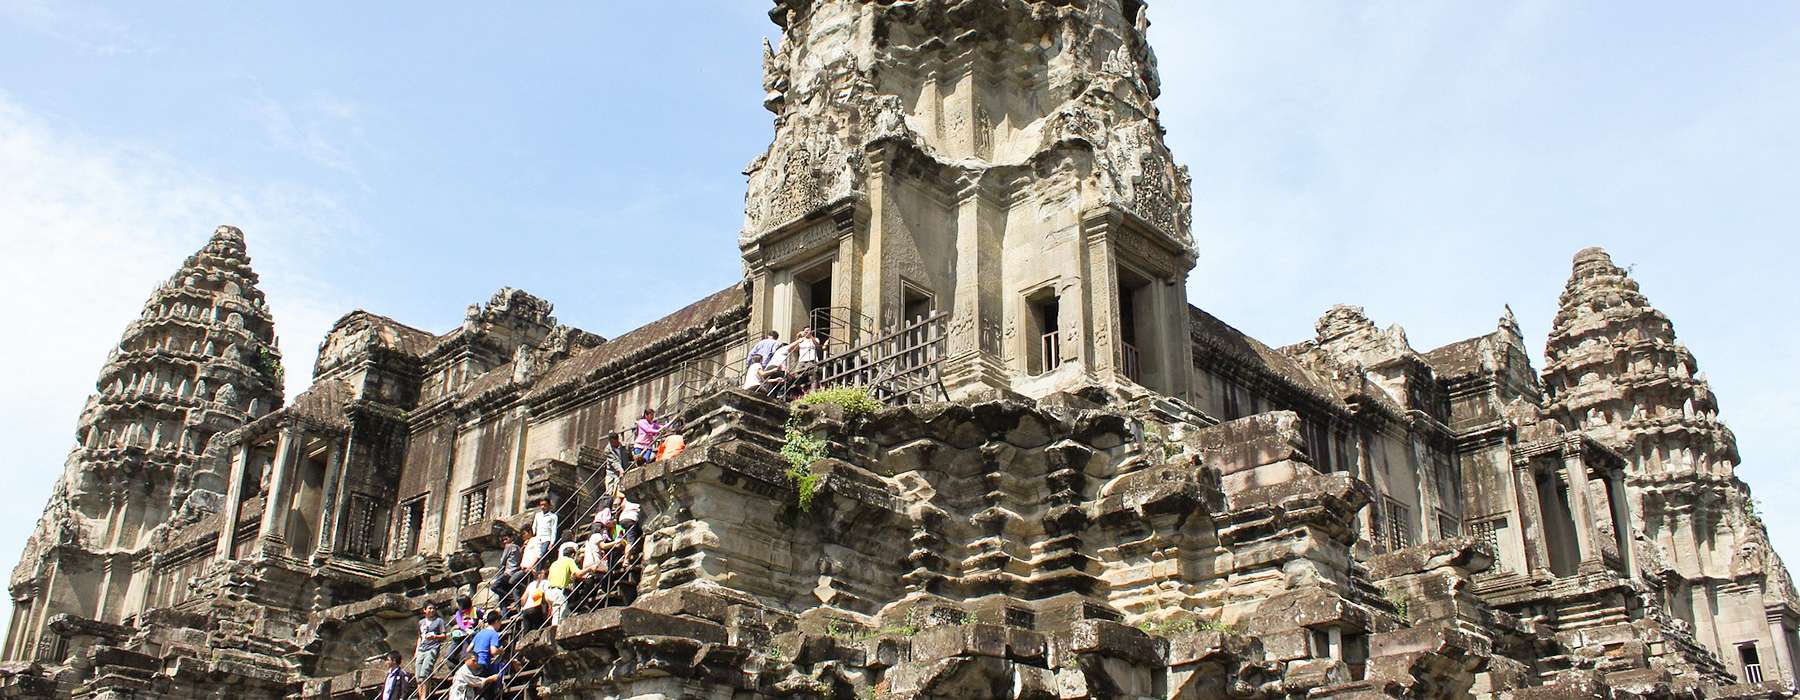 Angkor Complex, Cambodia - Indochina tour package